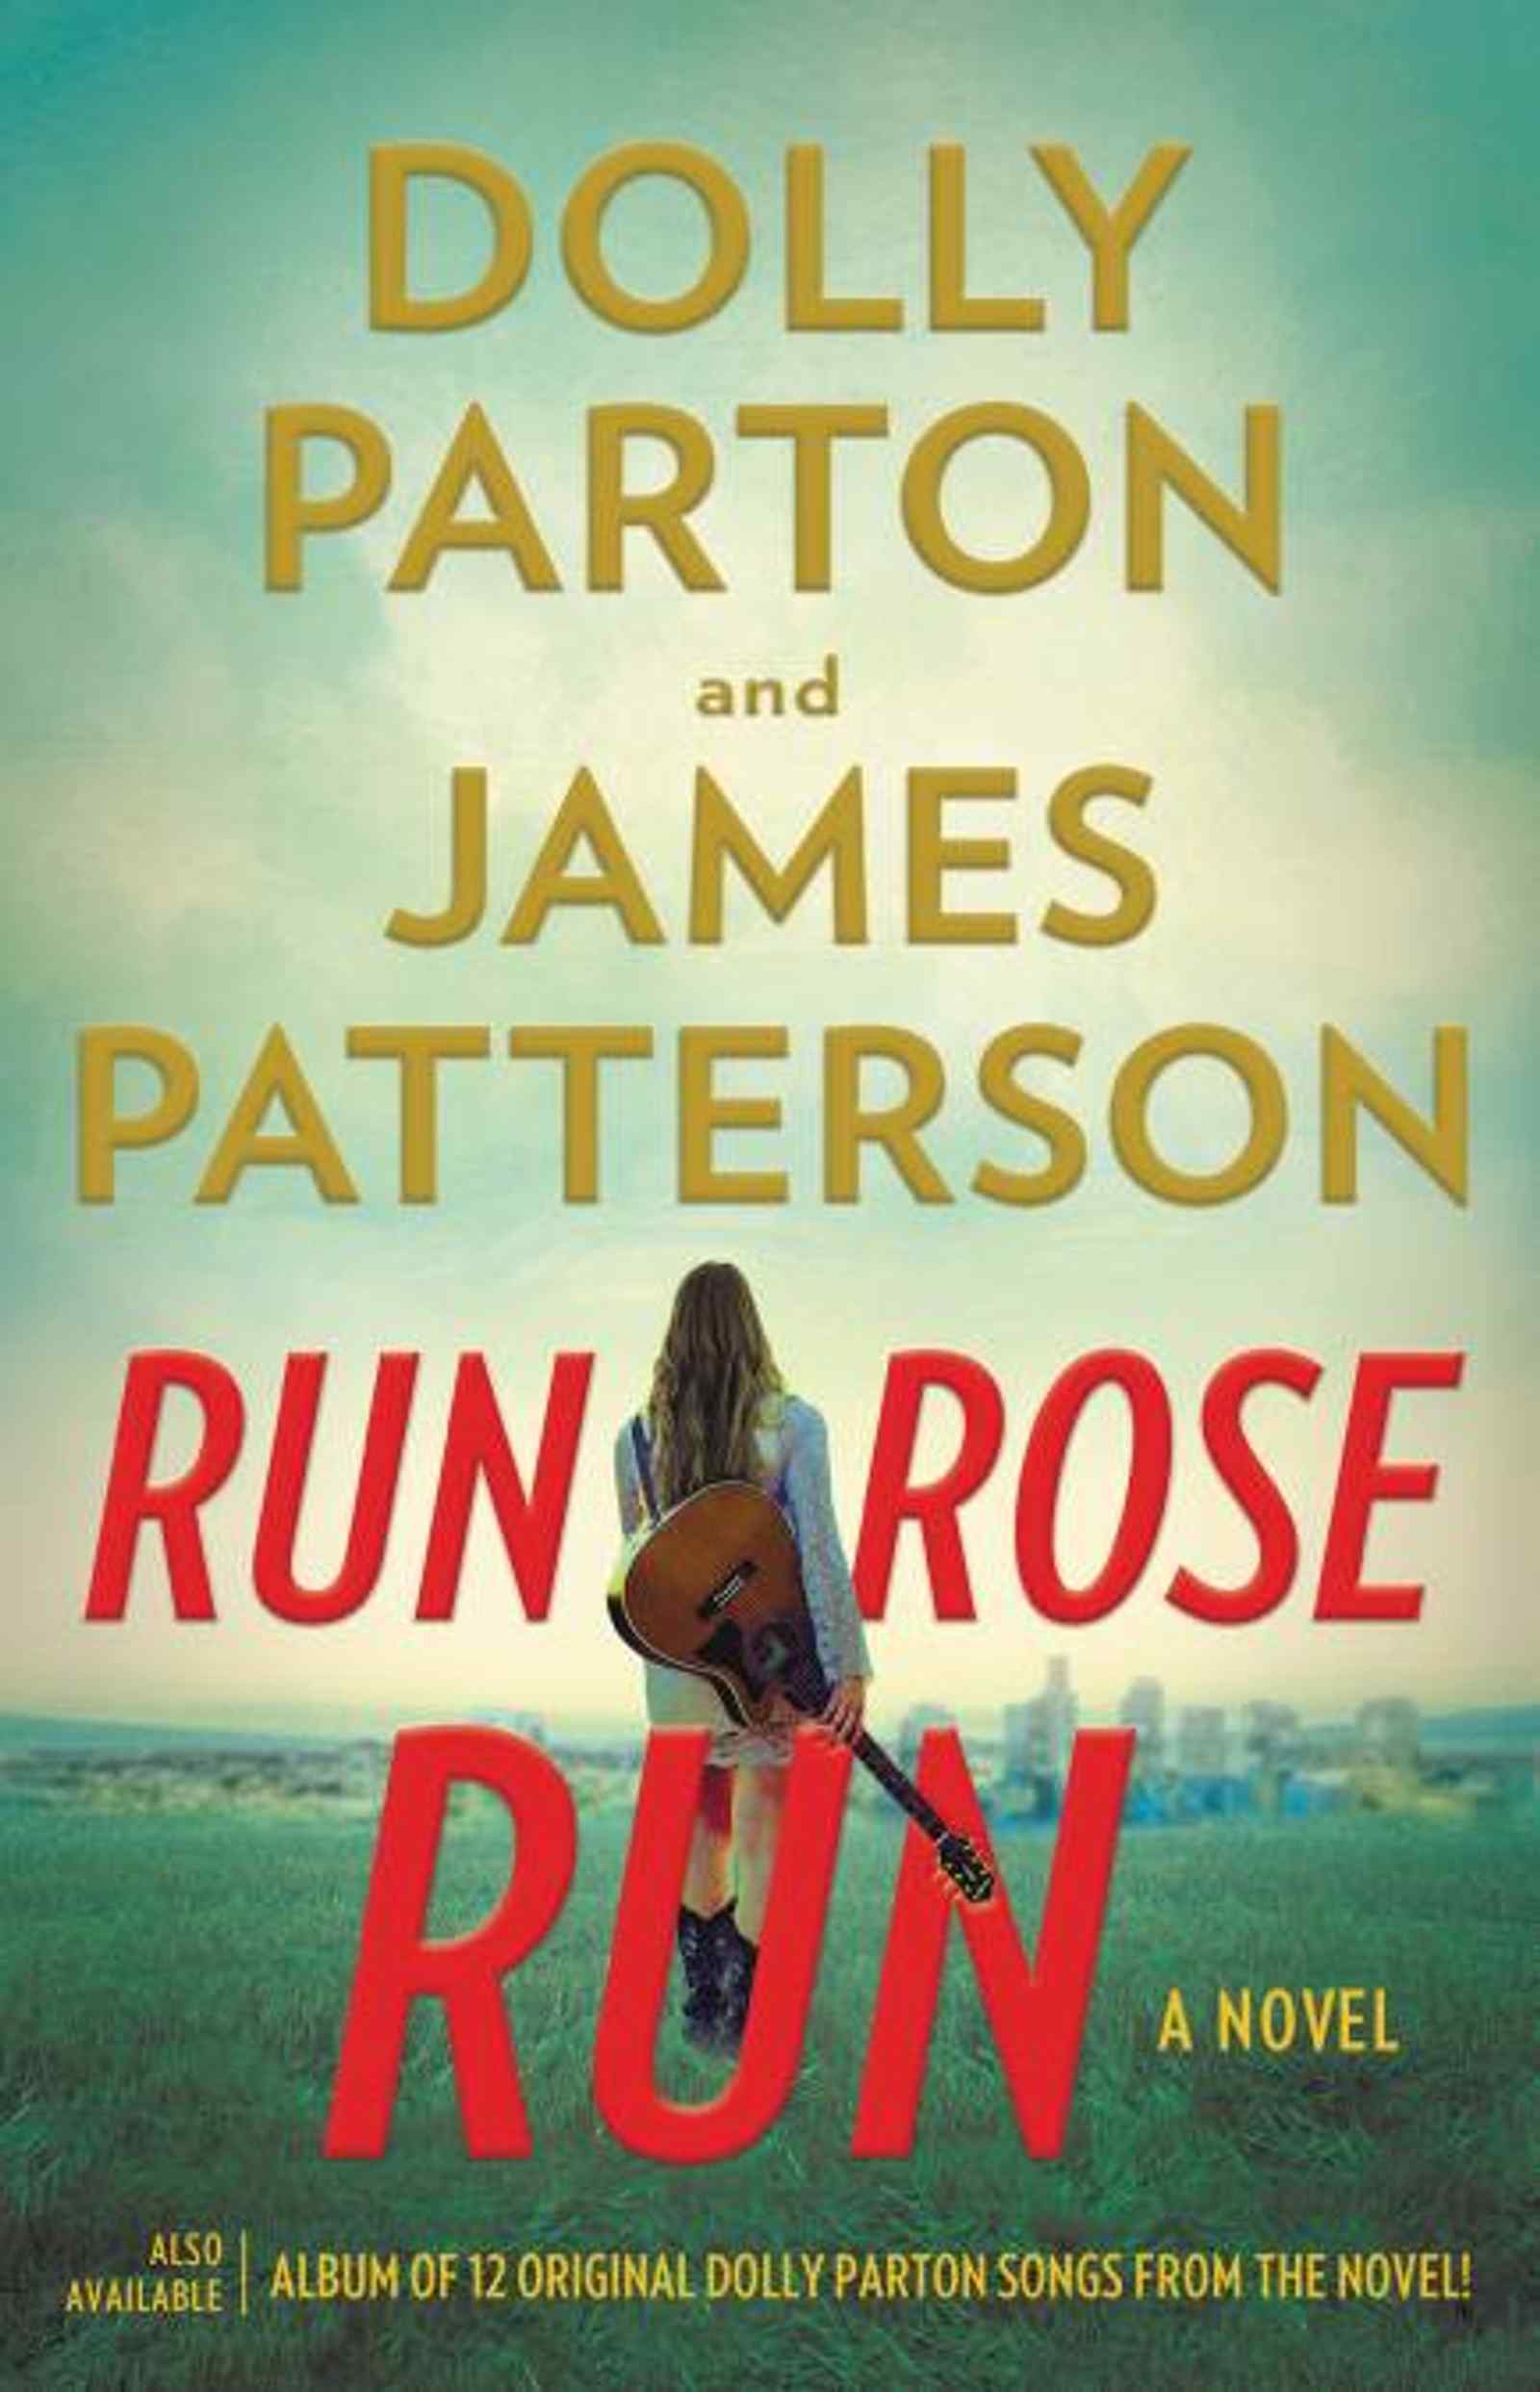 Run Rose Run by James Patterson and Dolly Parton